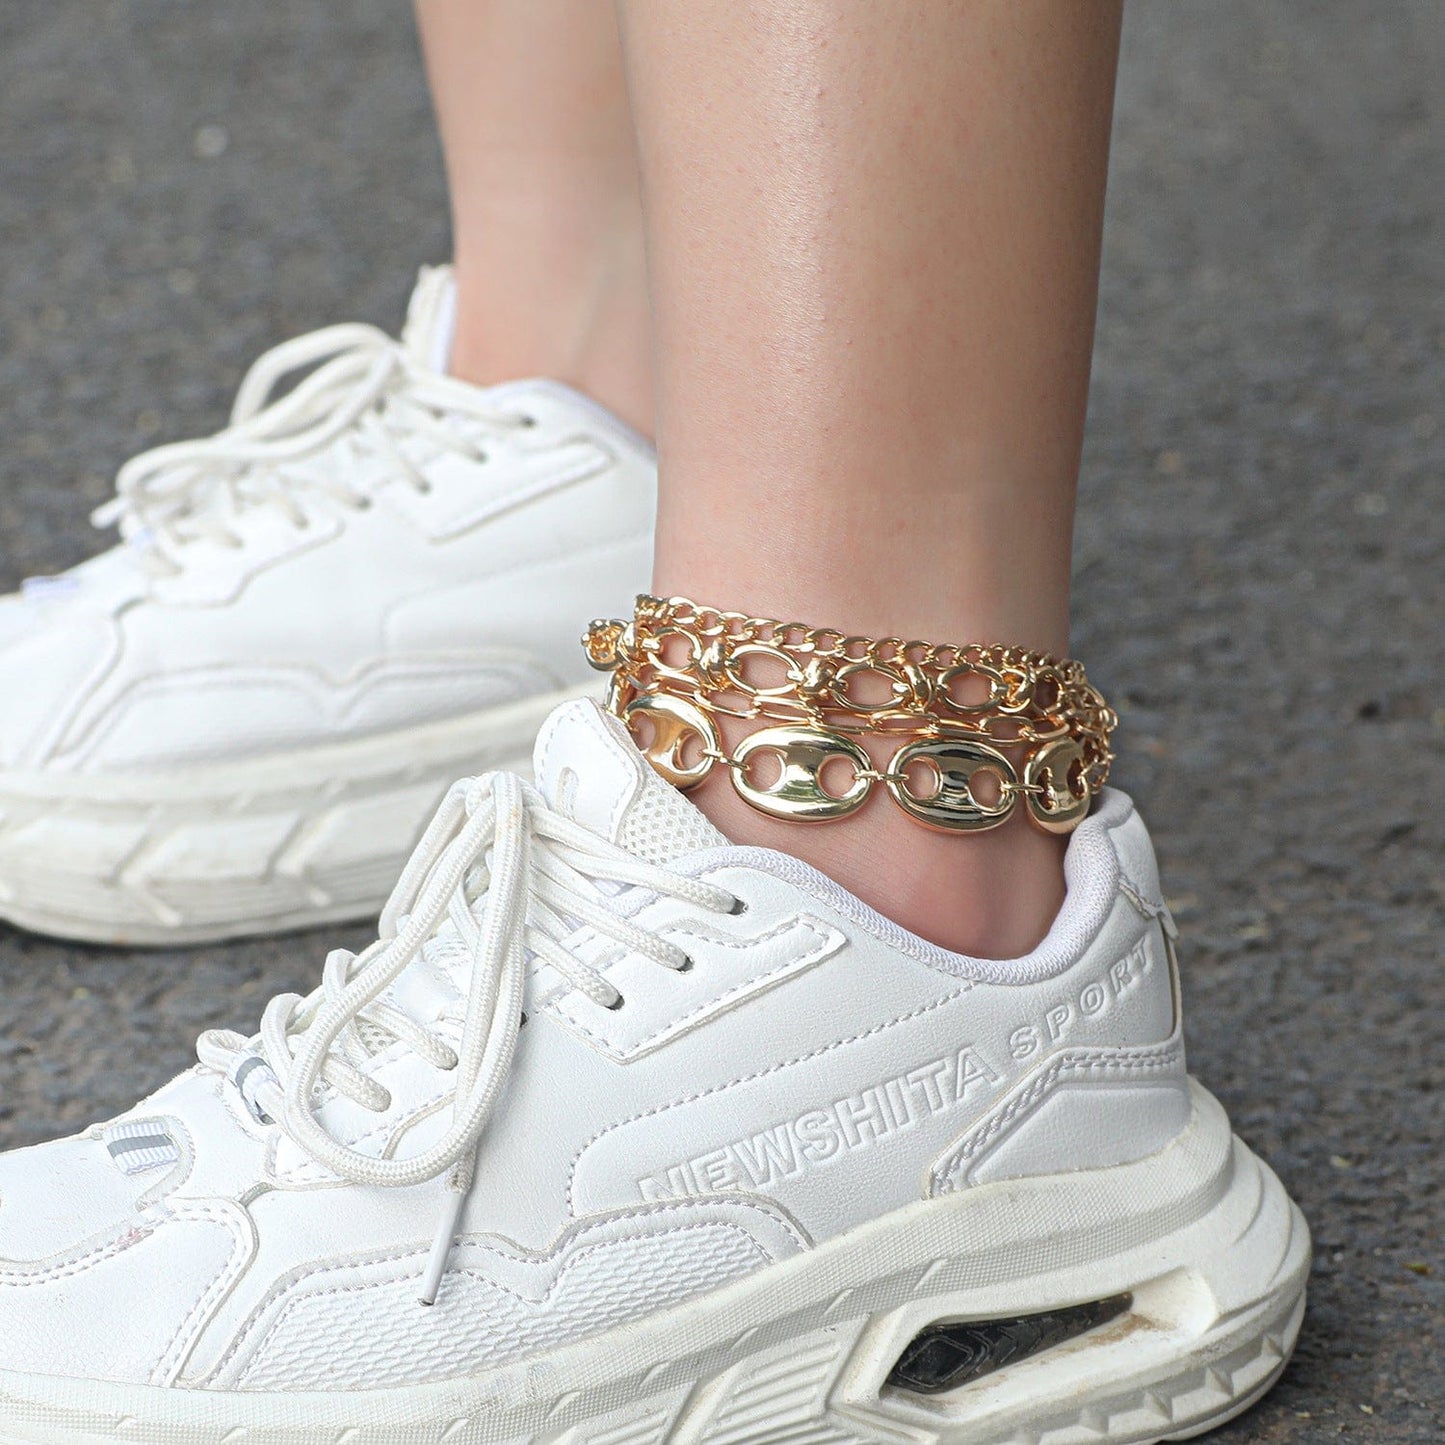 JuJumoose Punk exaggerated alloy chain beach anklets